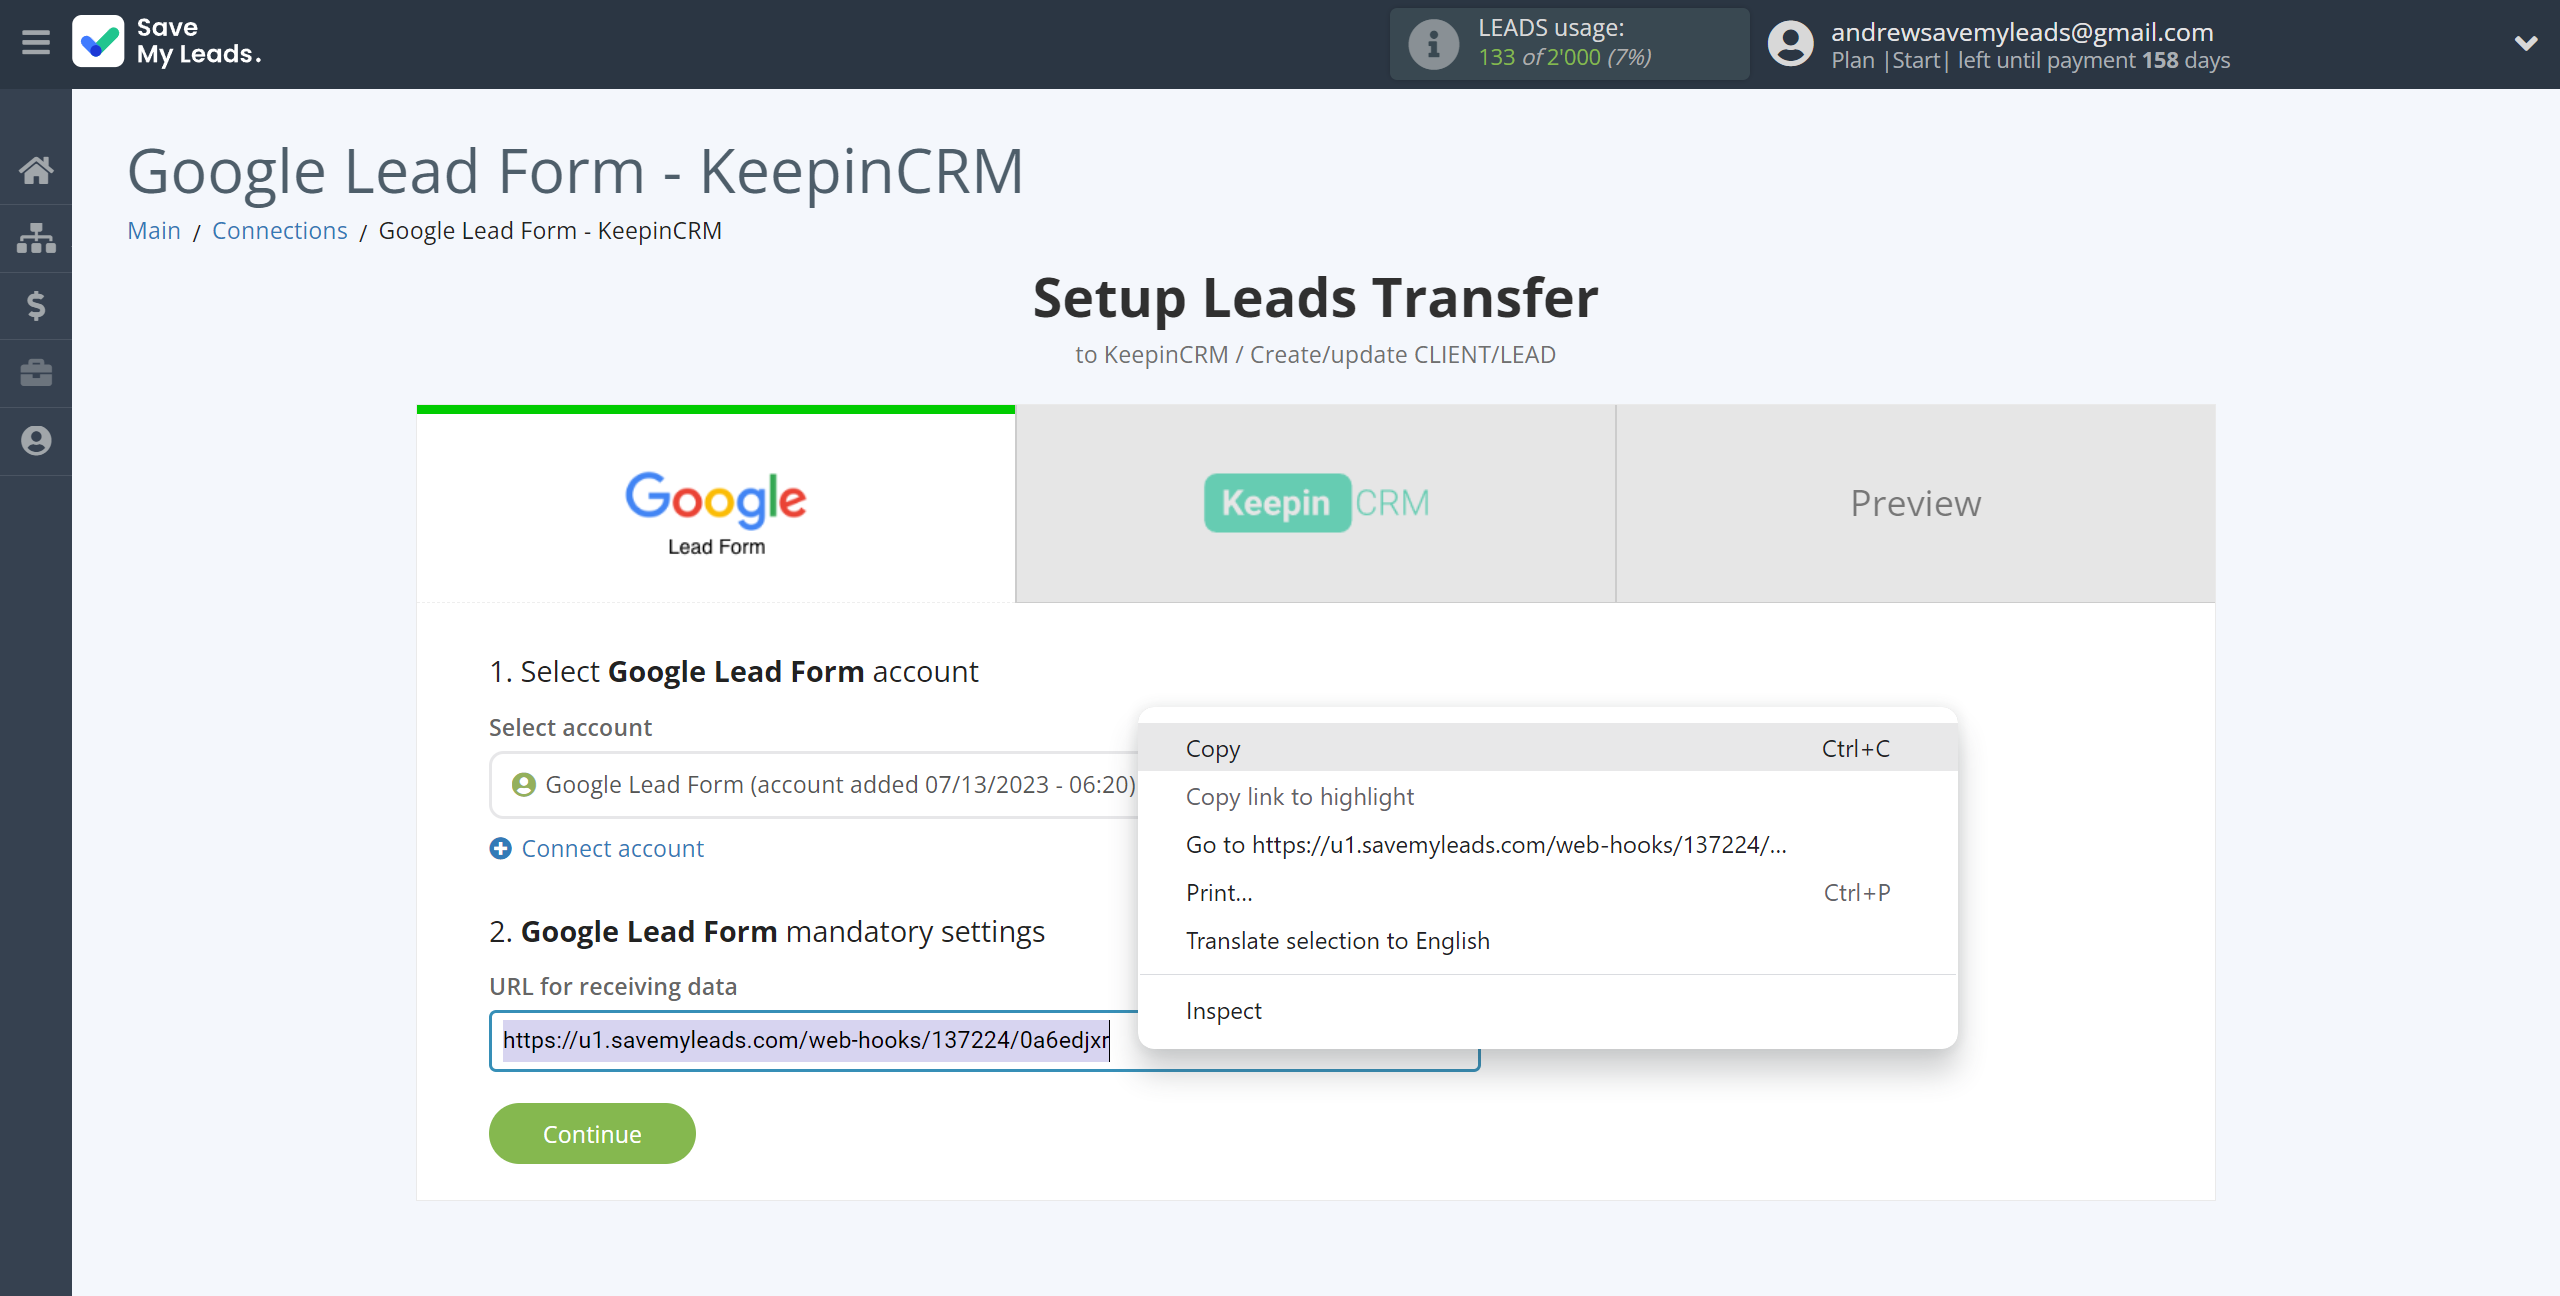 How to Connect Google Lead Form with KeepinCRM Create/update Client/Lead | Data Source account connection